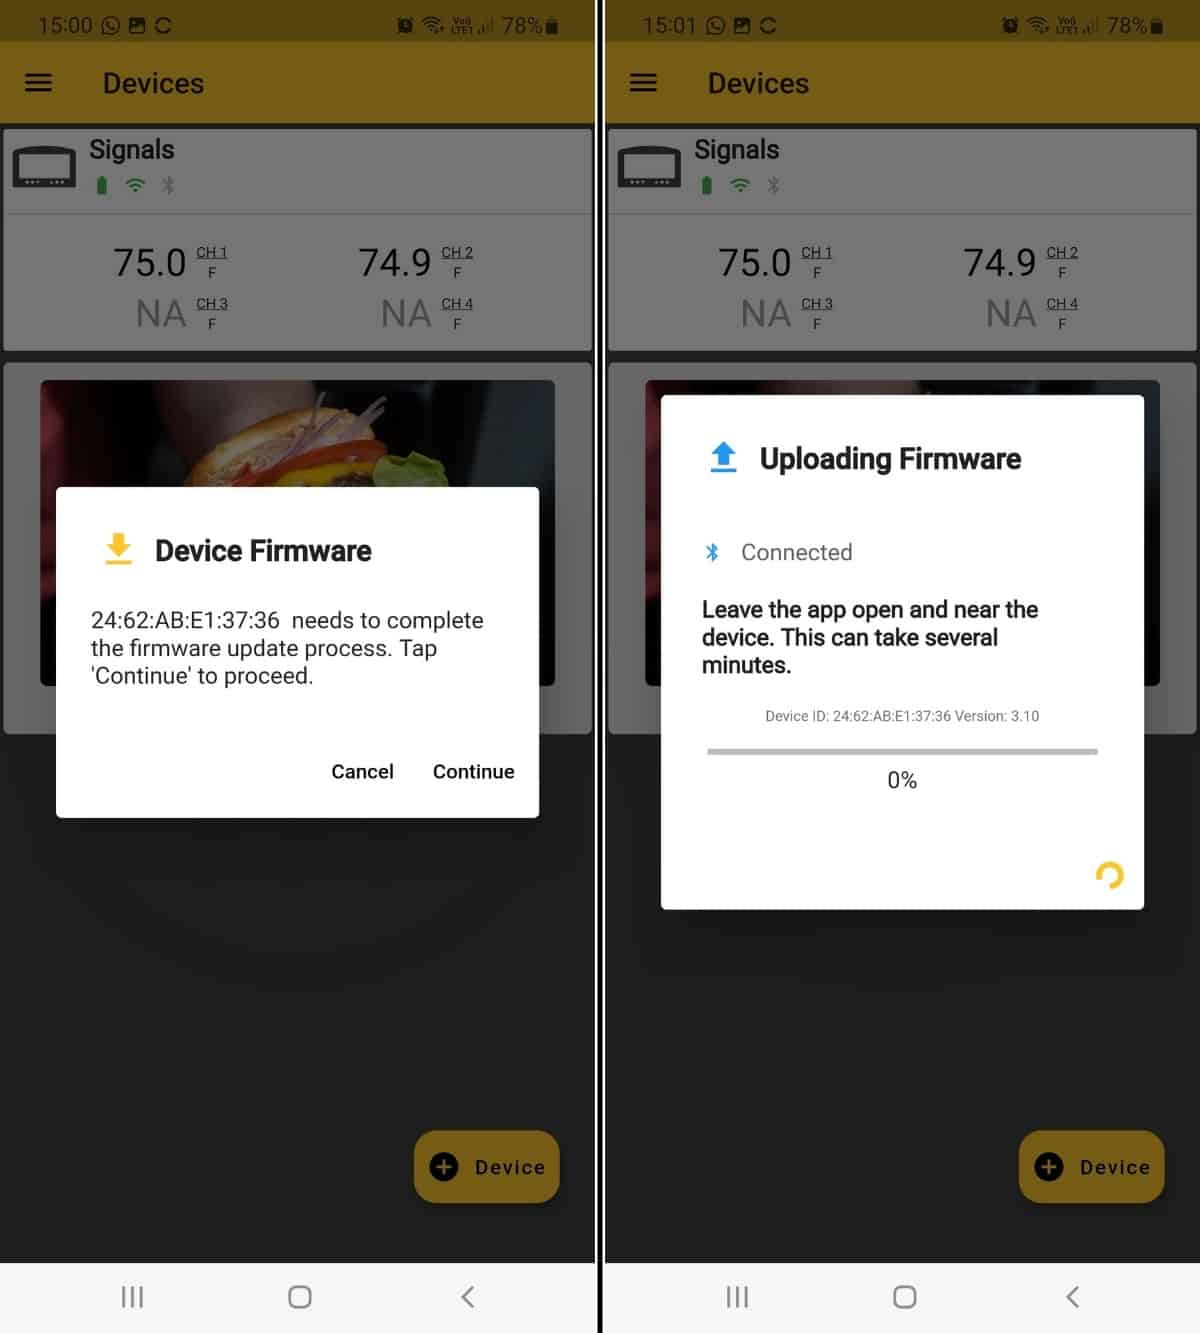 Thermoworks app screenshots showing the firmware update process, stages 3 and 4.